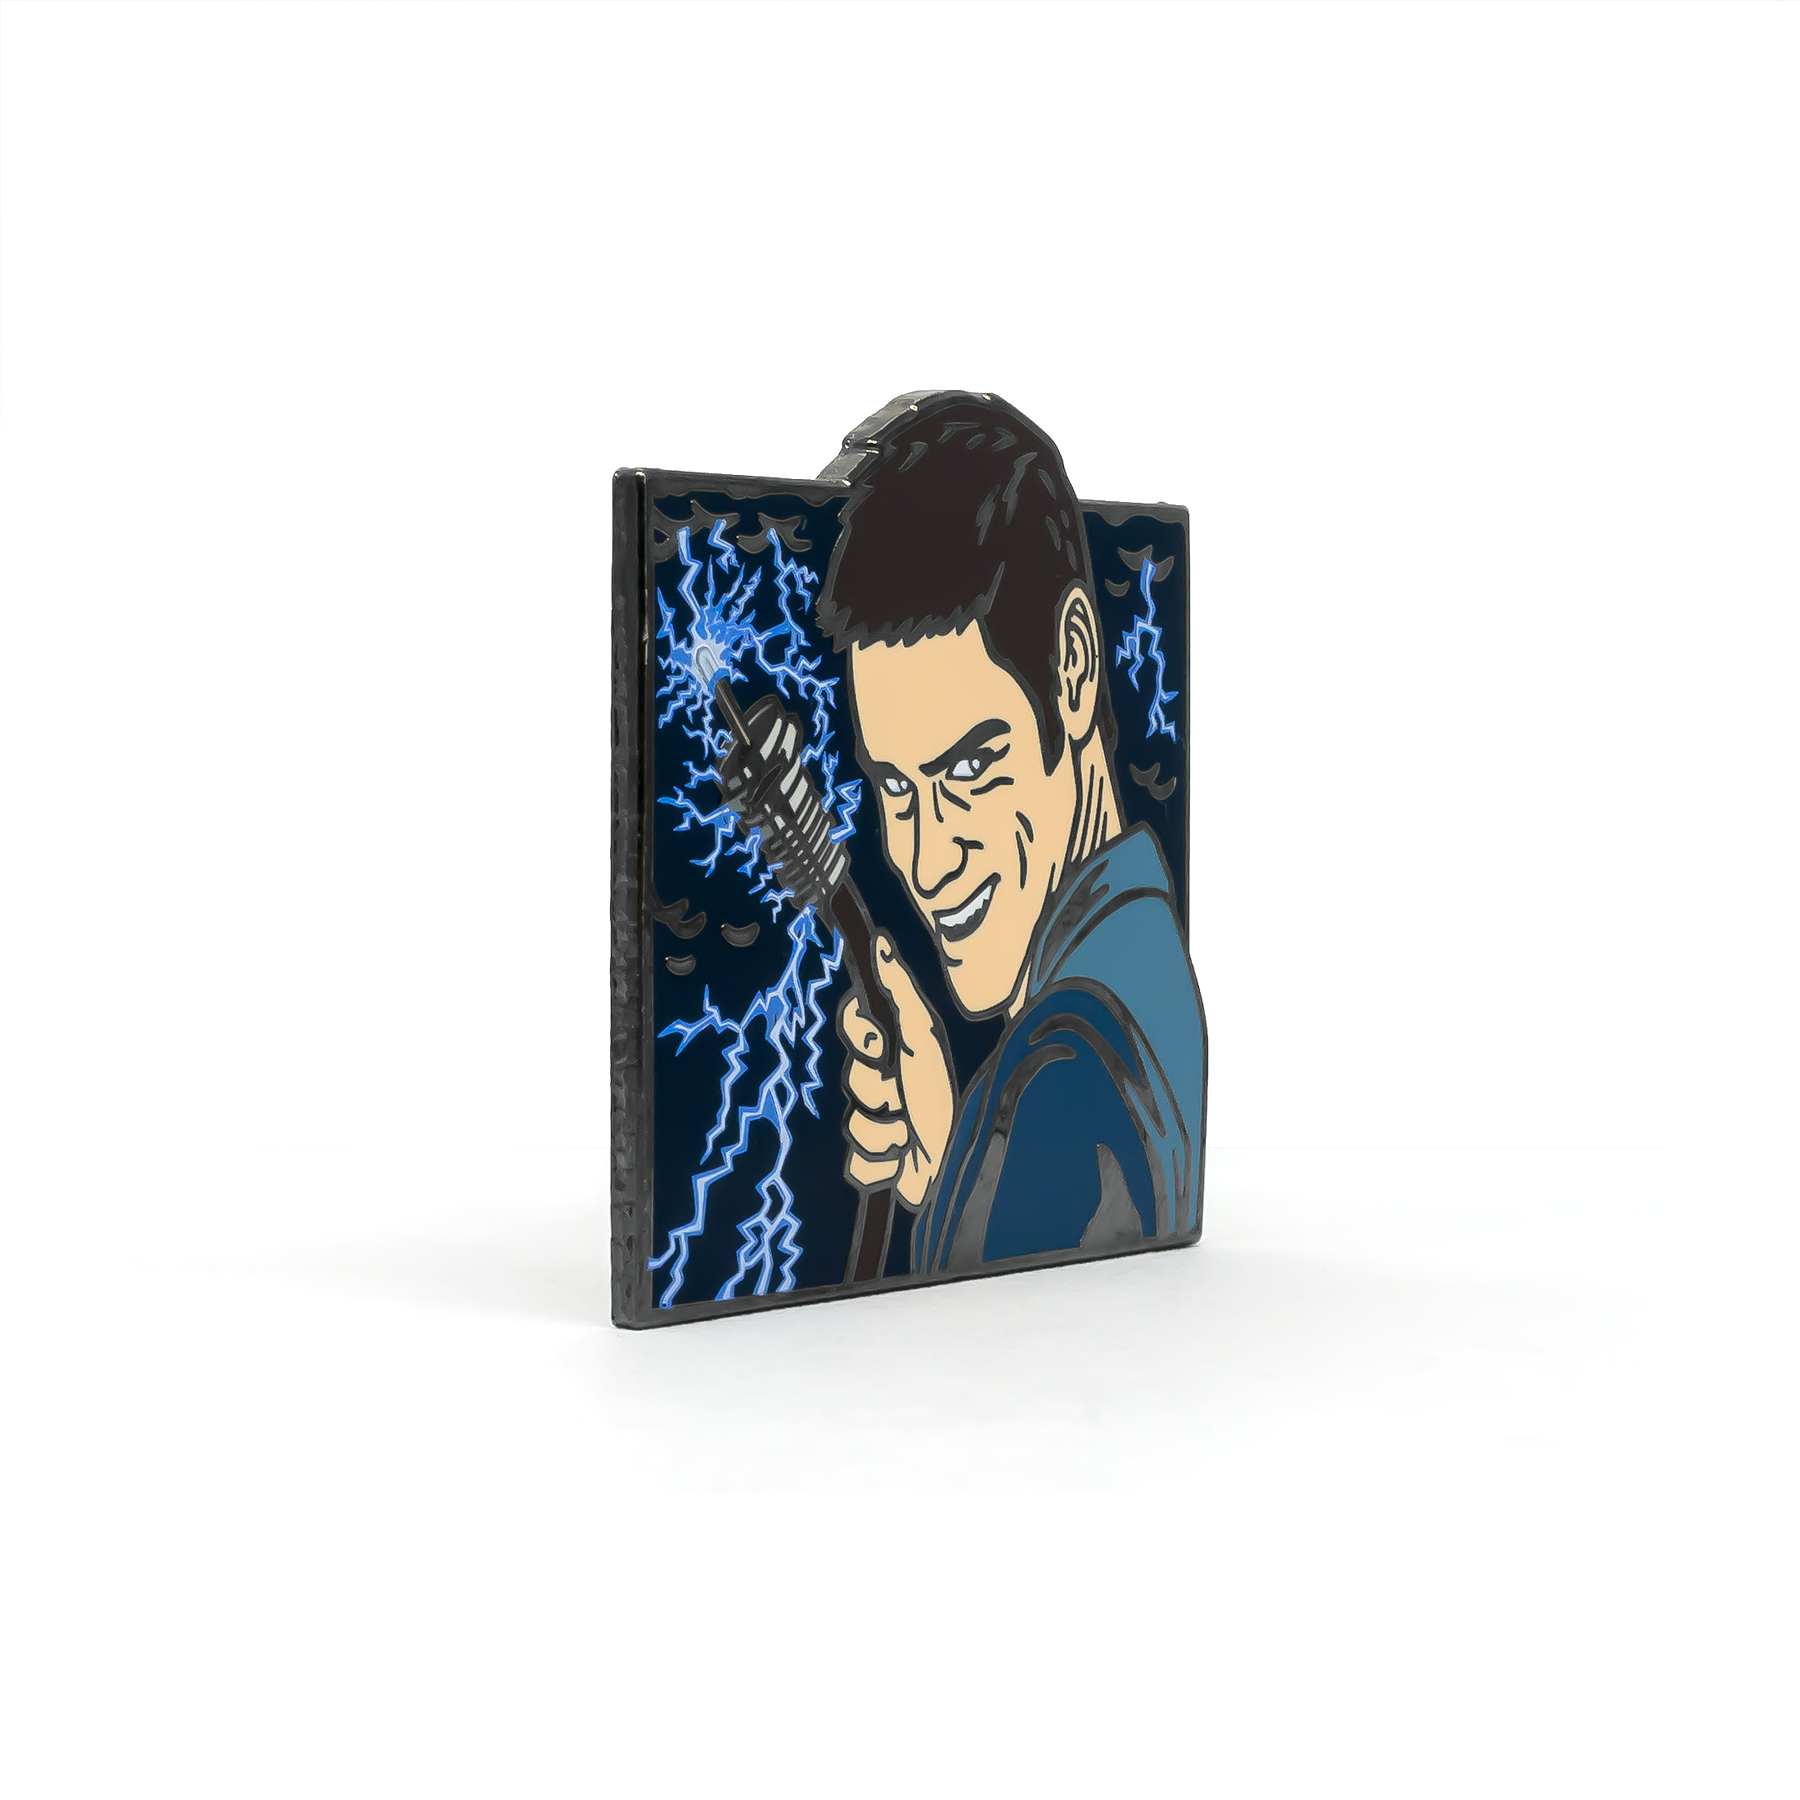 The Cable Guy enamel pin